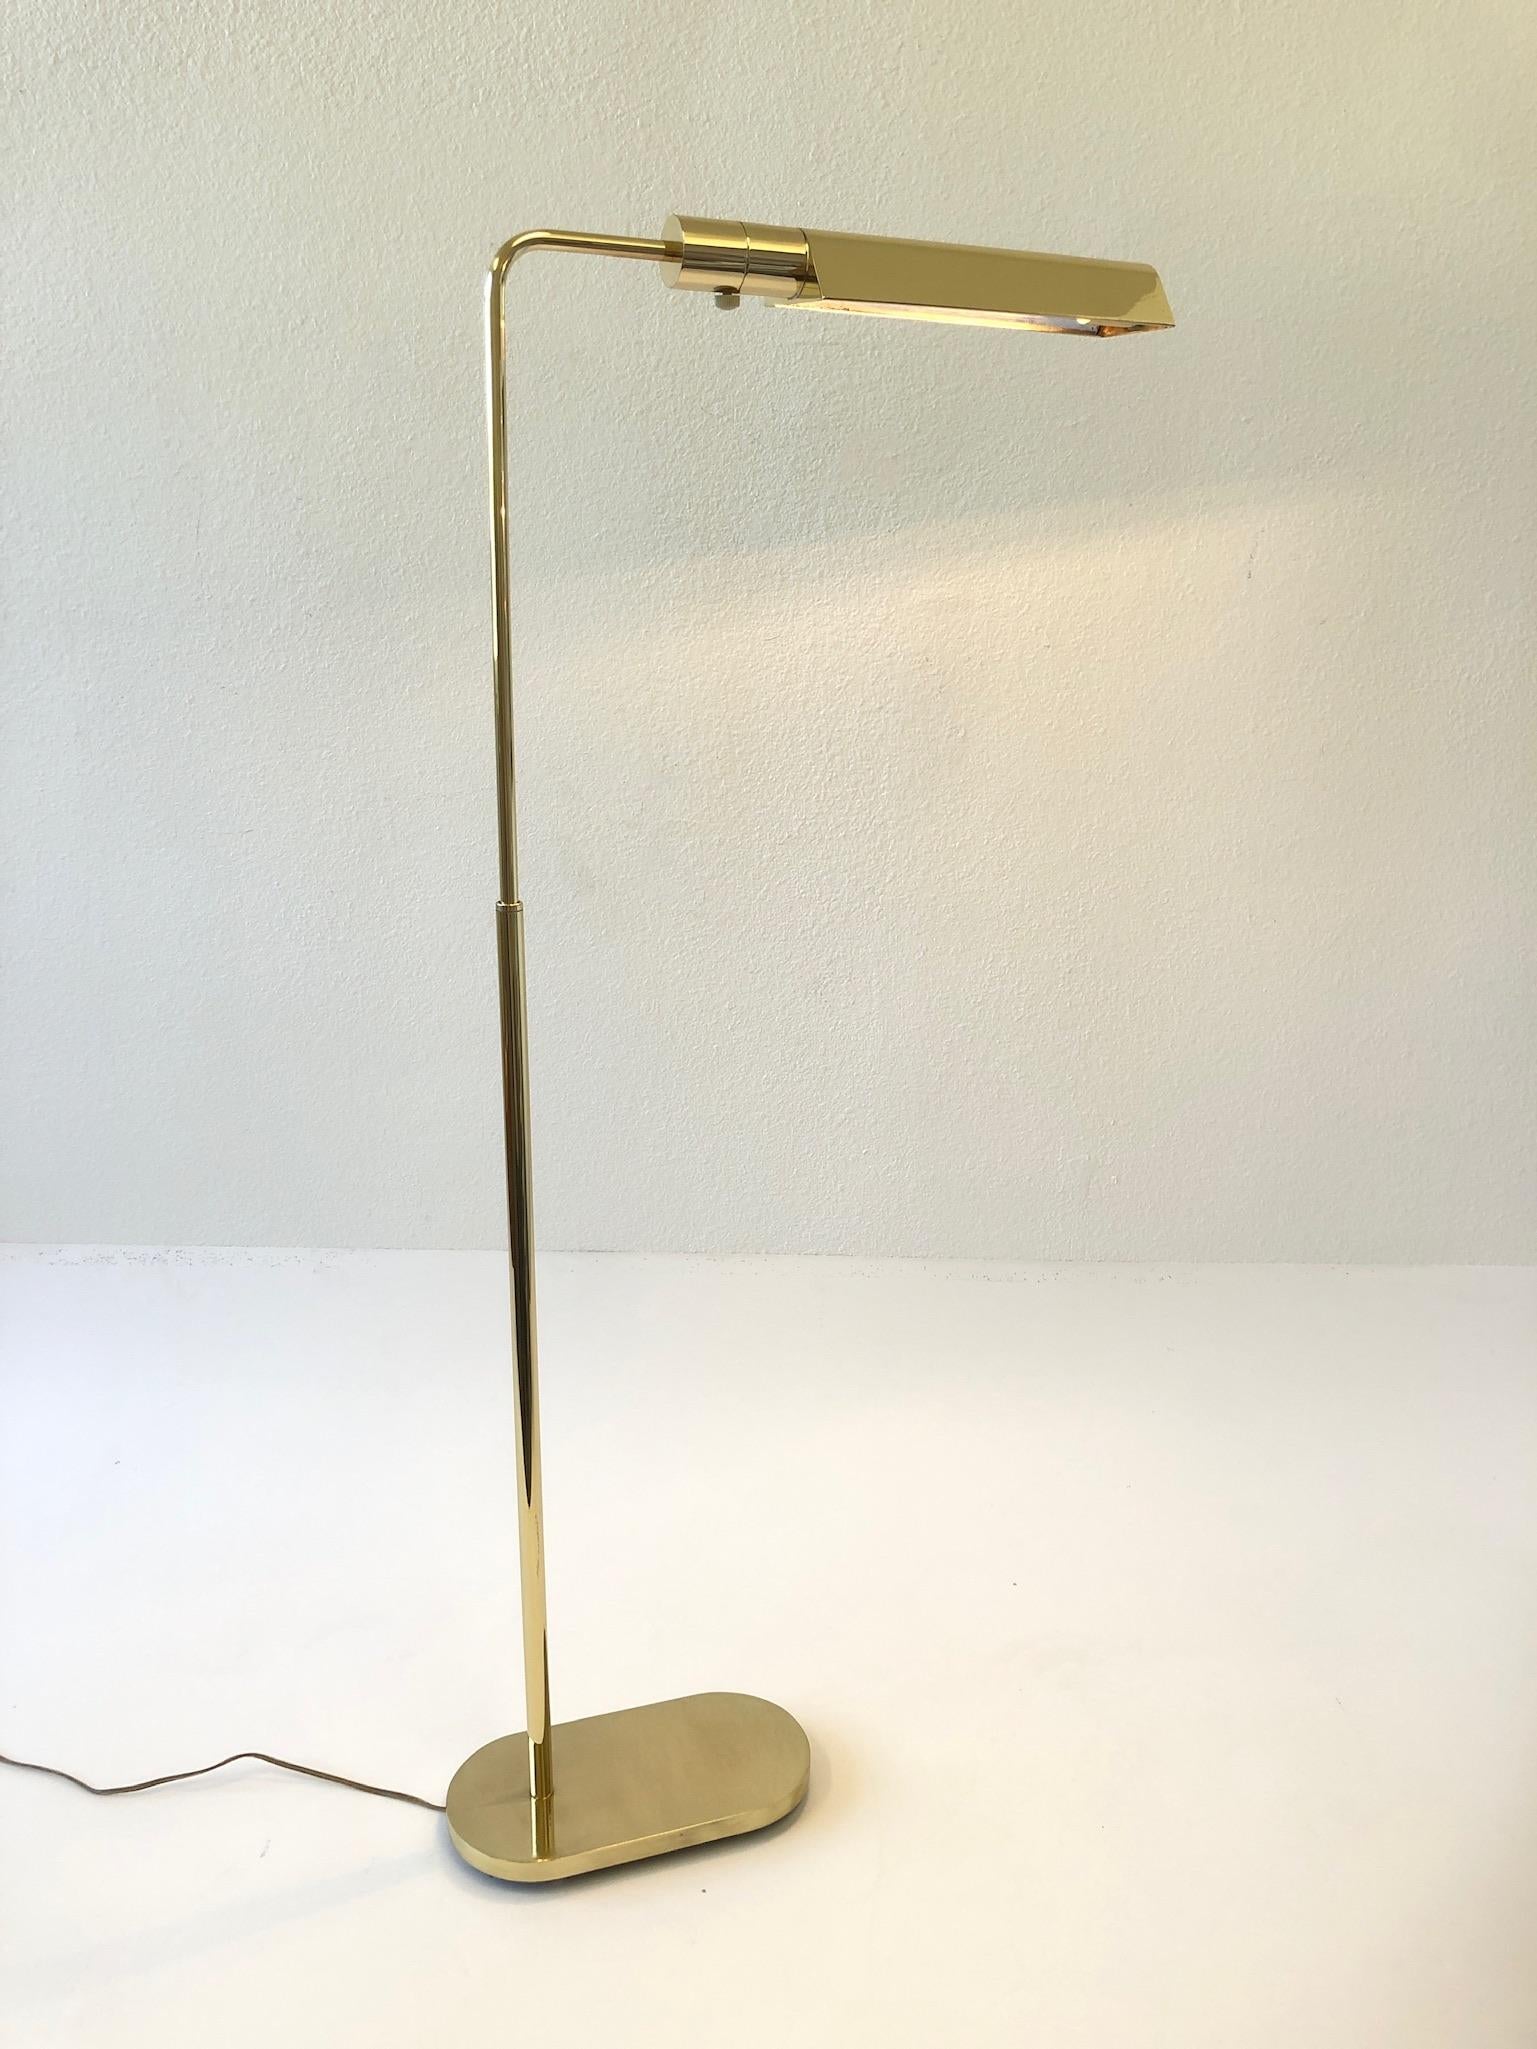 Brass Adjustable Floor Lamp by Casella In Excellent Condition For Sale In Palm Springs, CA